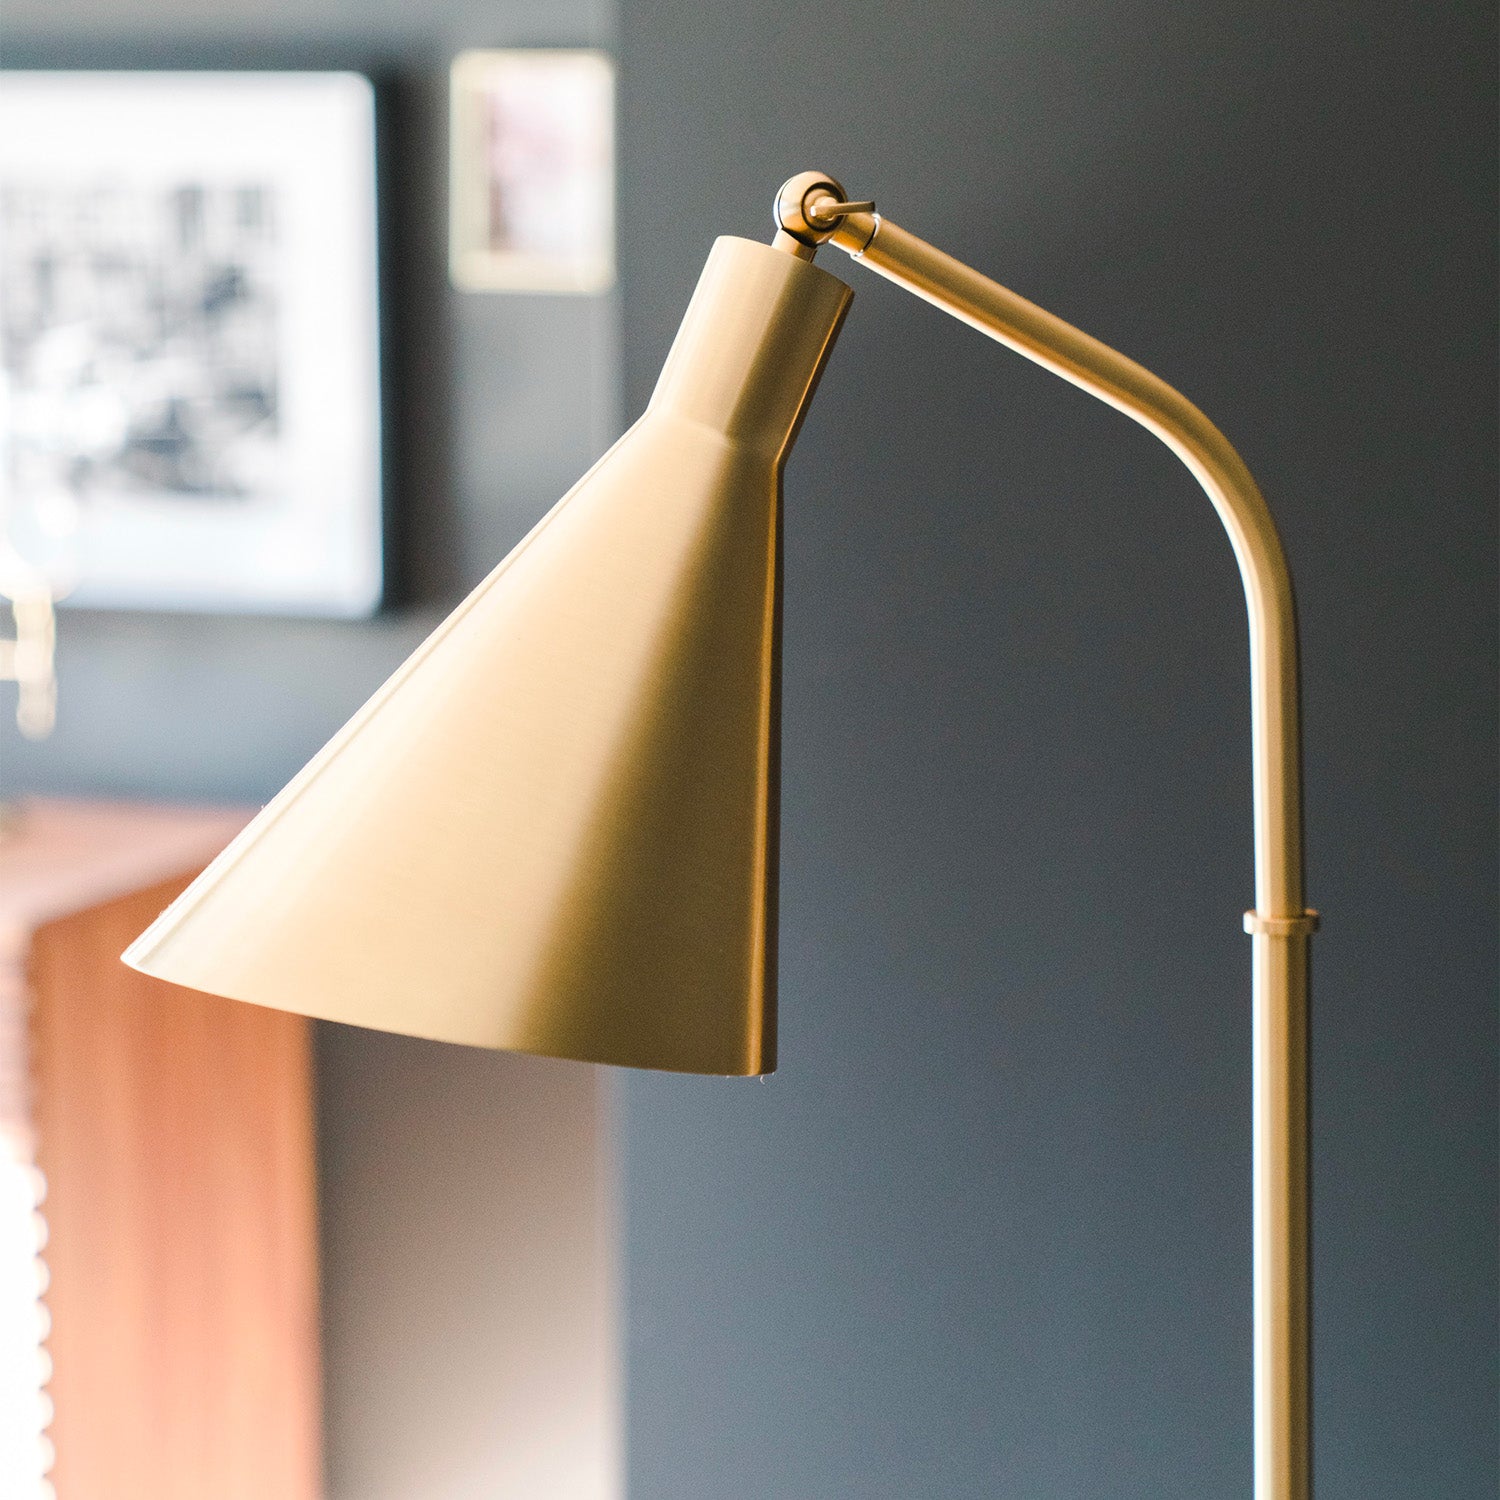 SANTON - Chic and vintage brass and marble floor lamp